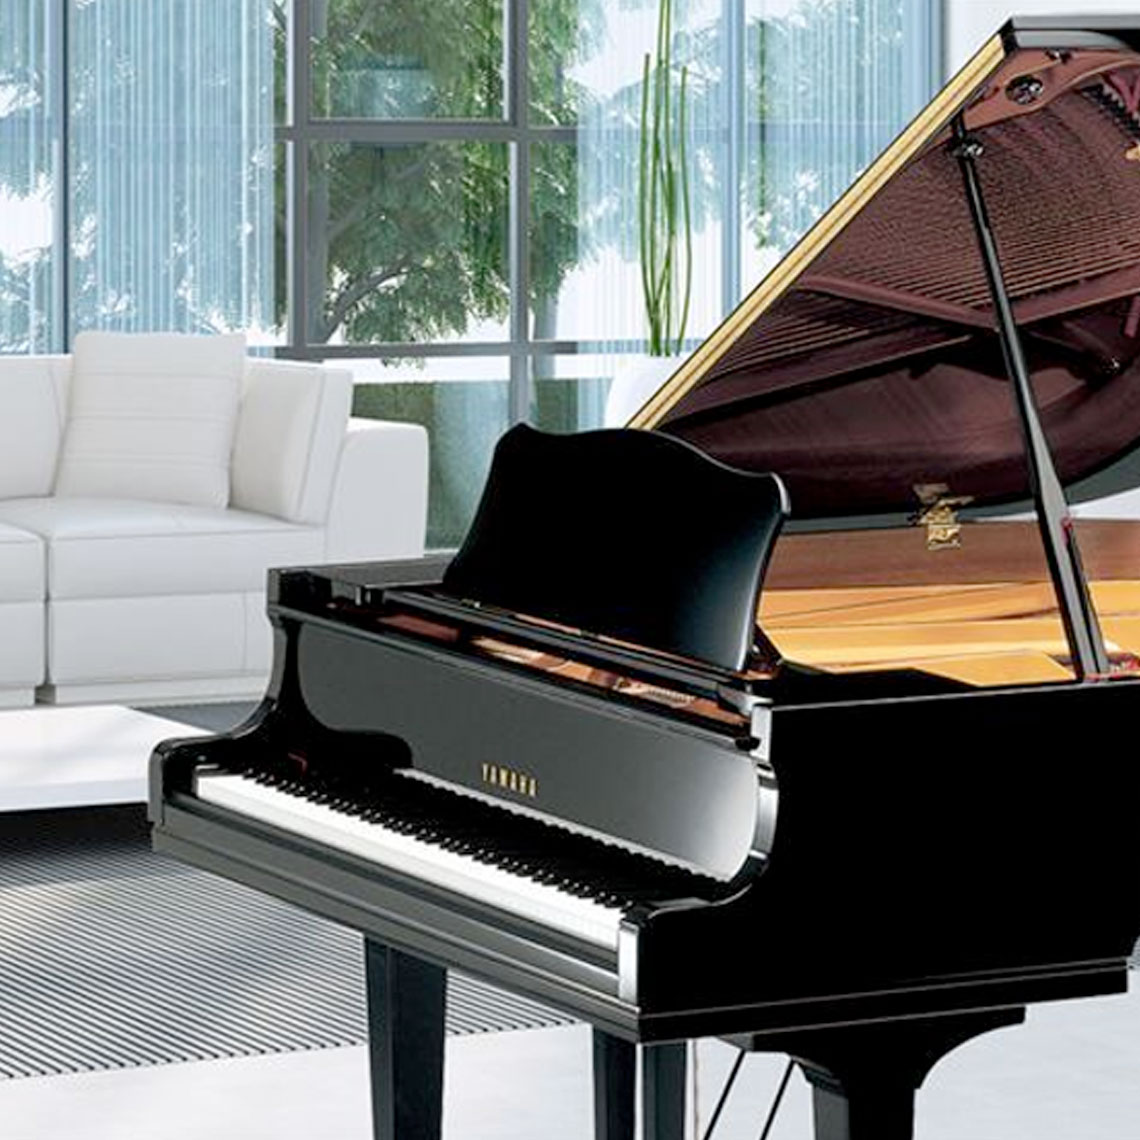 Now is the time to own your dream piano.